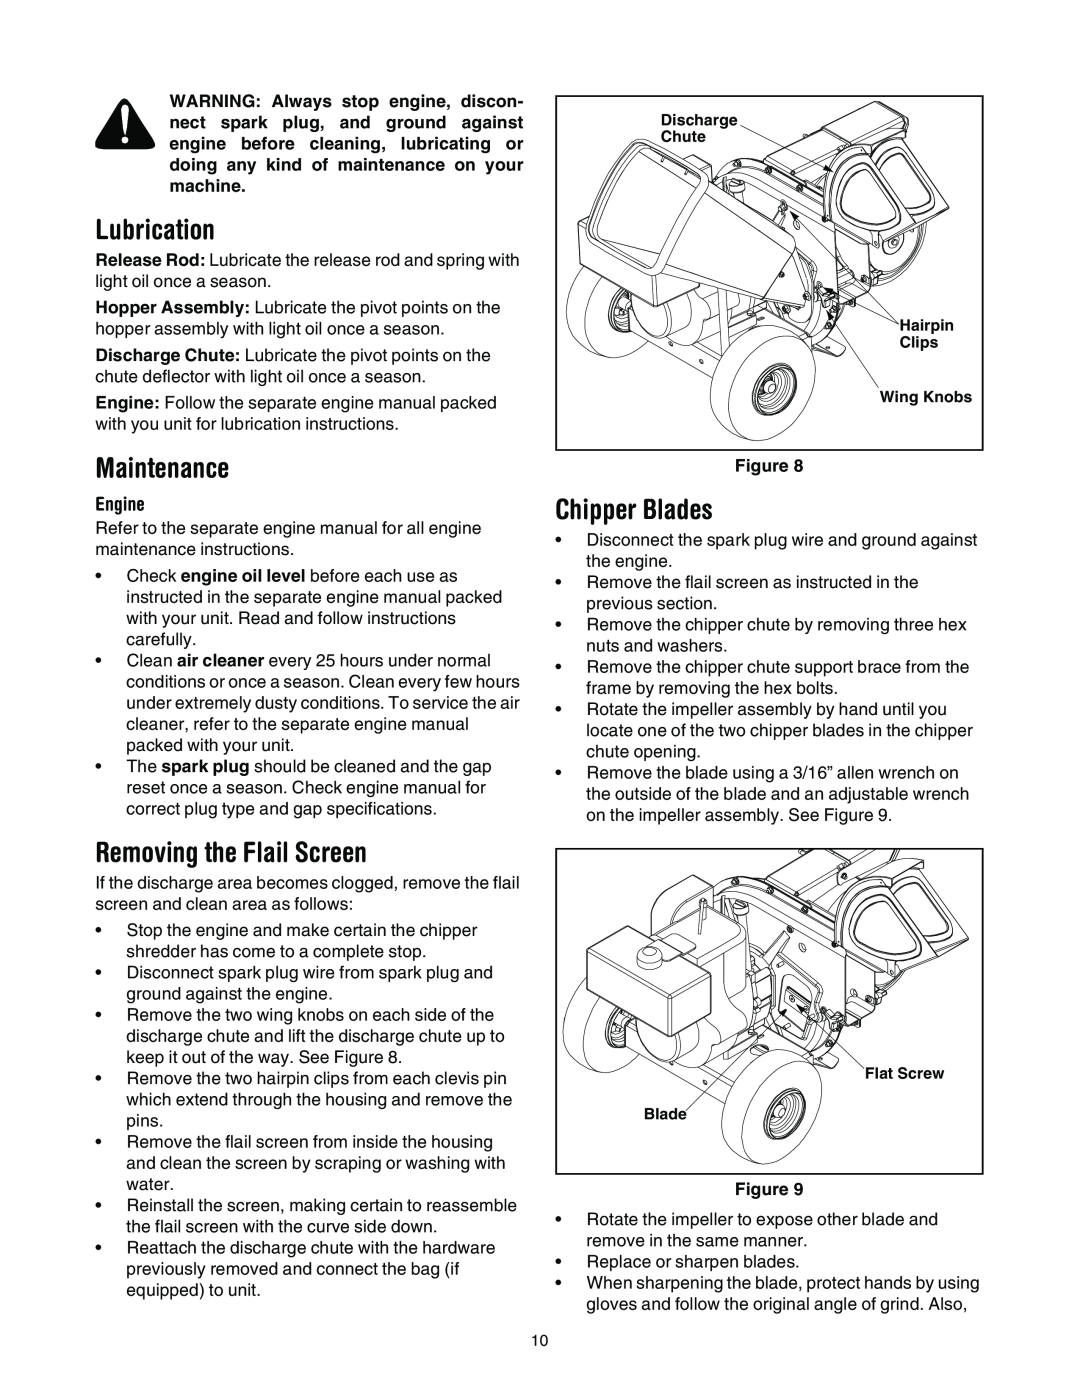 Troy-Bilt 494 manual Lubrication, Maintenance, Removing the Flail Screen, Chipper Blades, Engine 